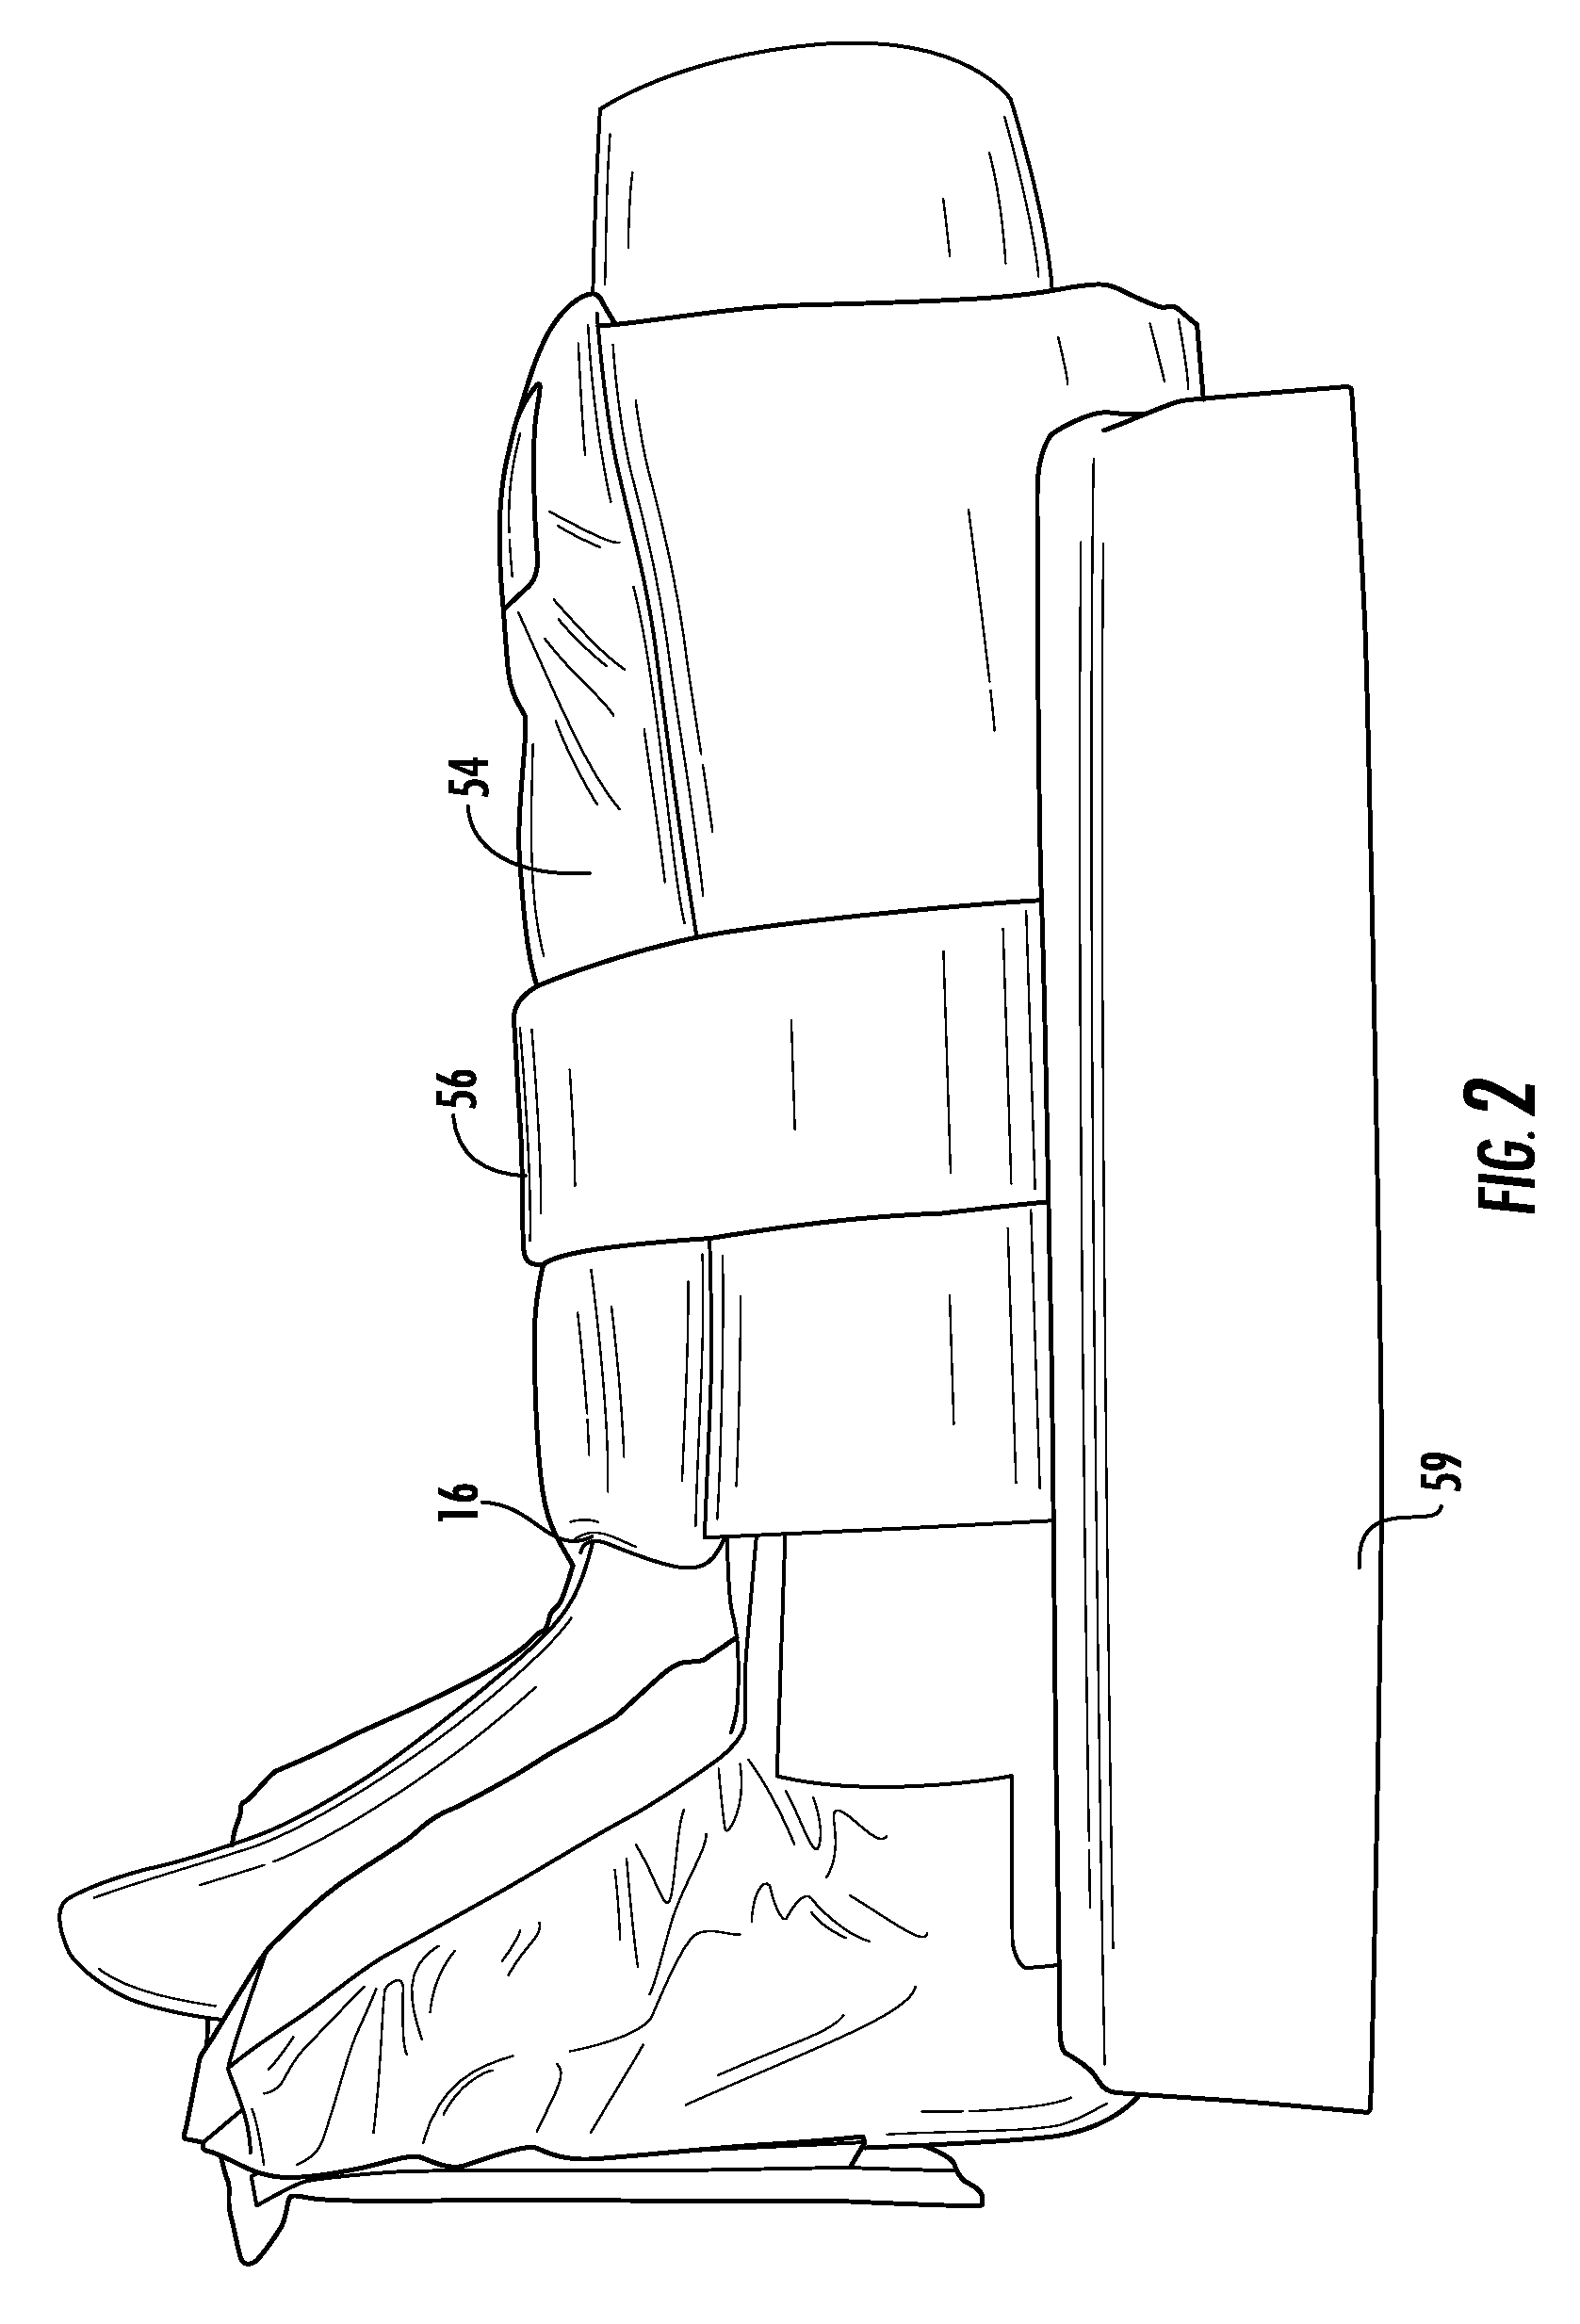 Compression device in combination with lower limb protection